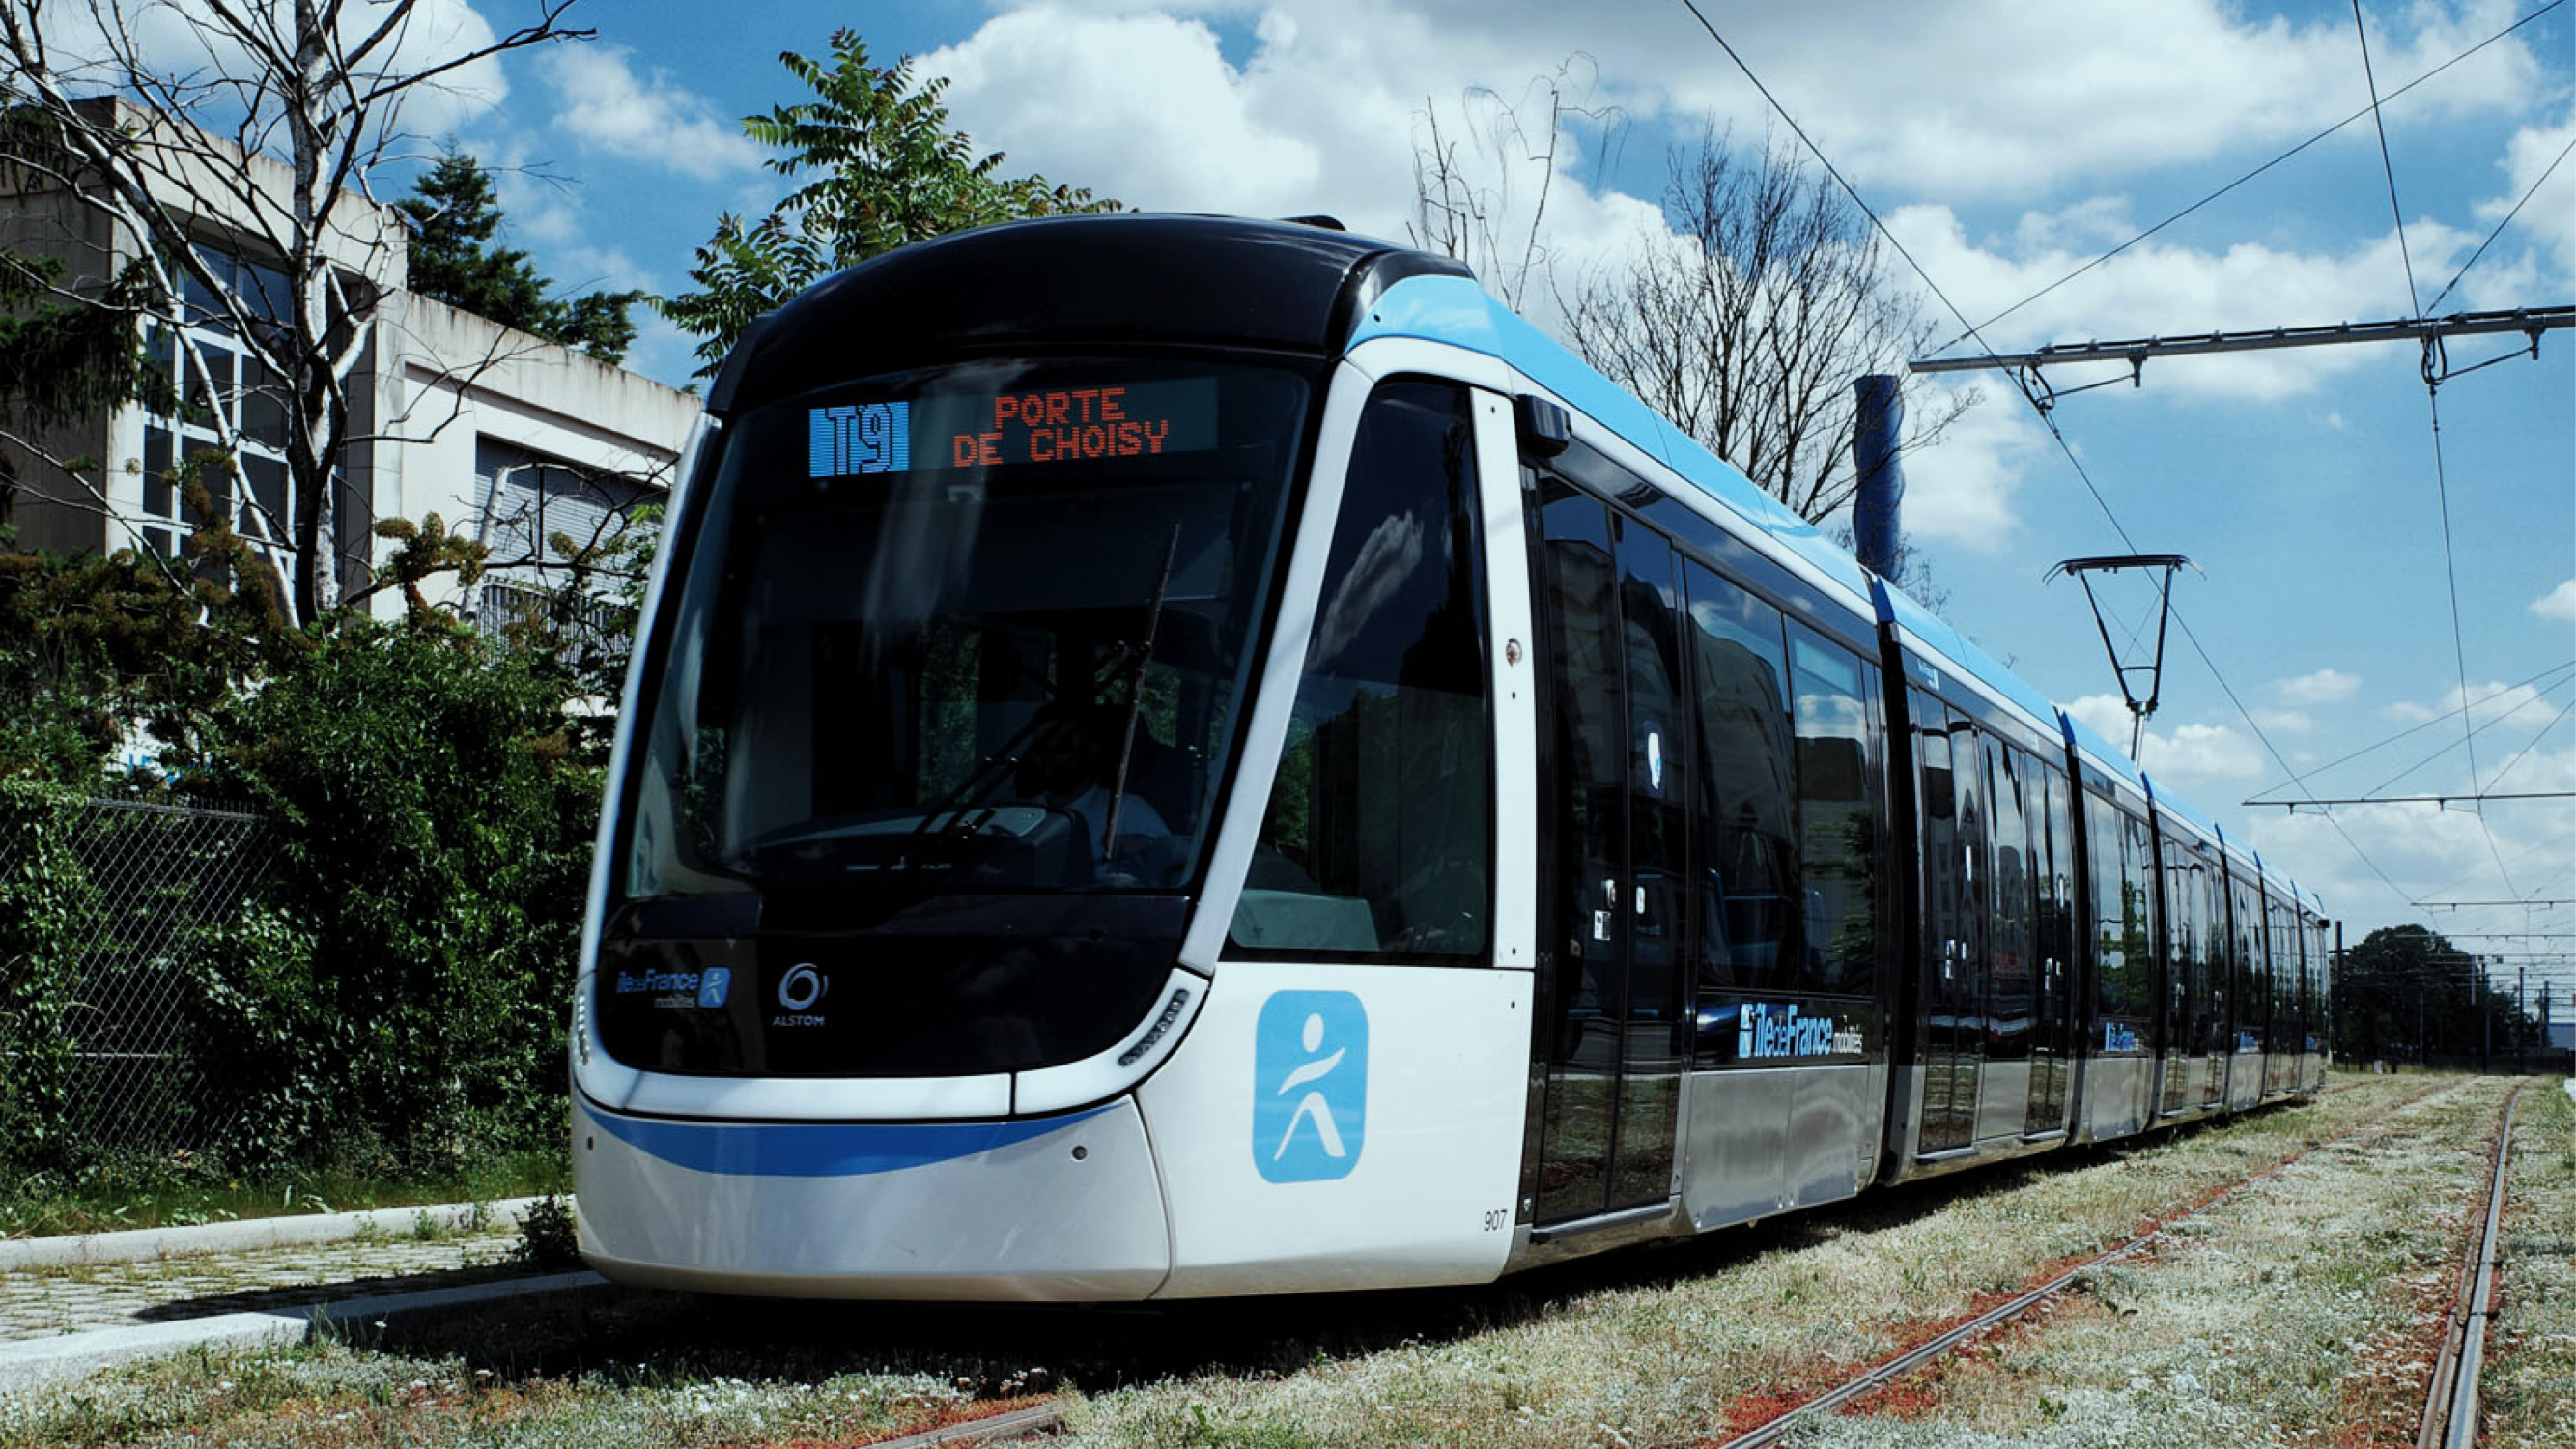 The tramway is a sustainable solution